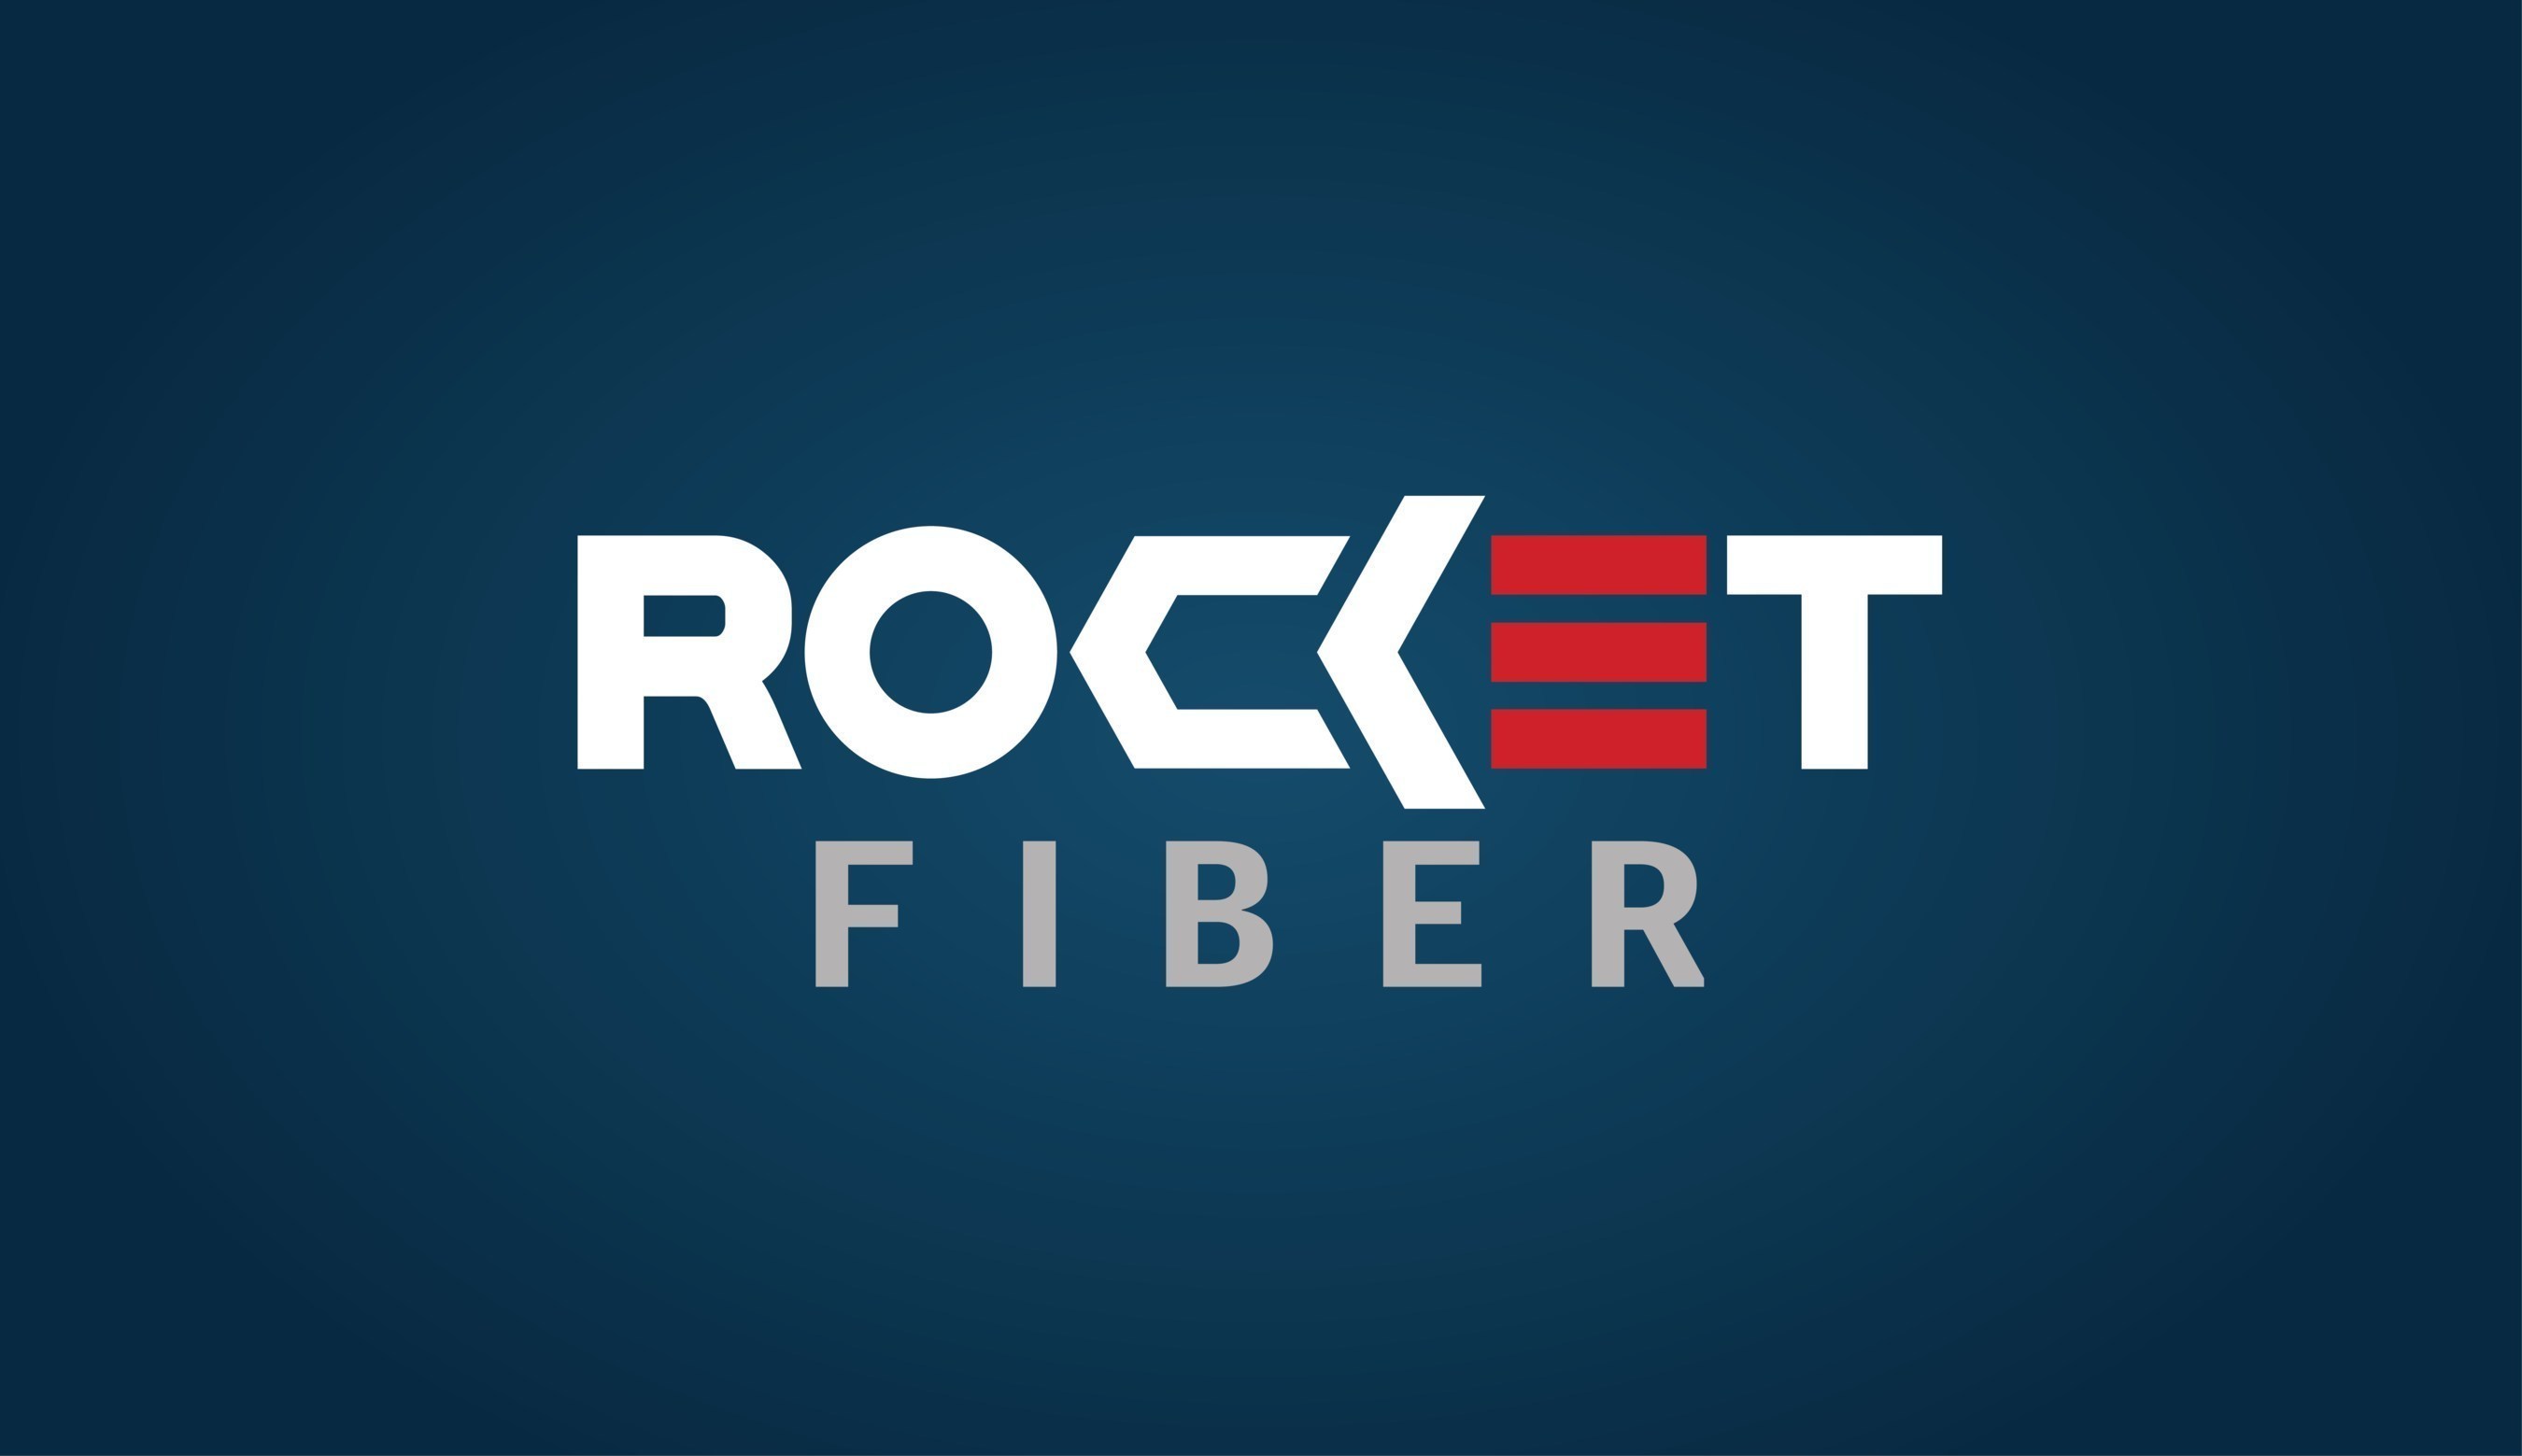 Detroit-based Rocket Fiber announces 10-gigabit residential Internet service in Detroit and up to 100-gigabit Internet service for businesses on November 12, 2015 - #10GintheD